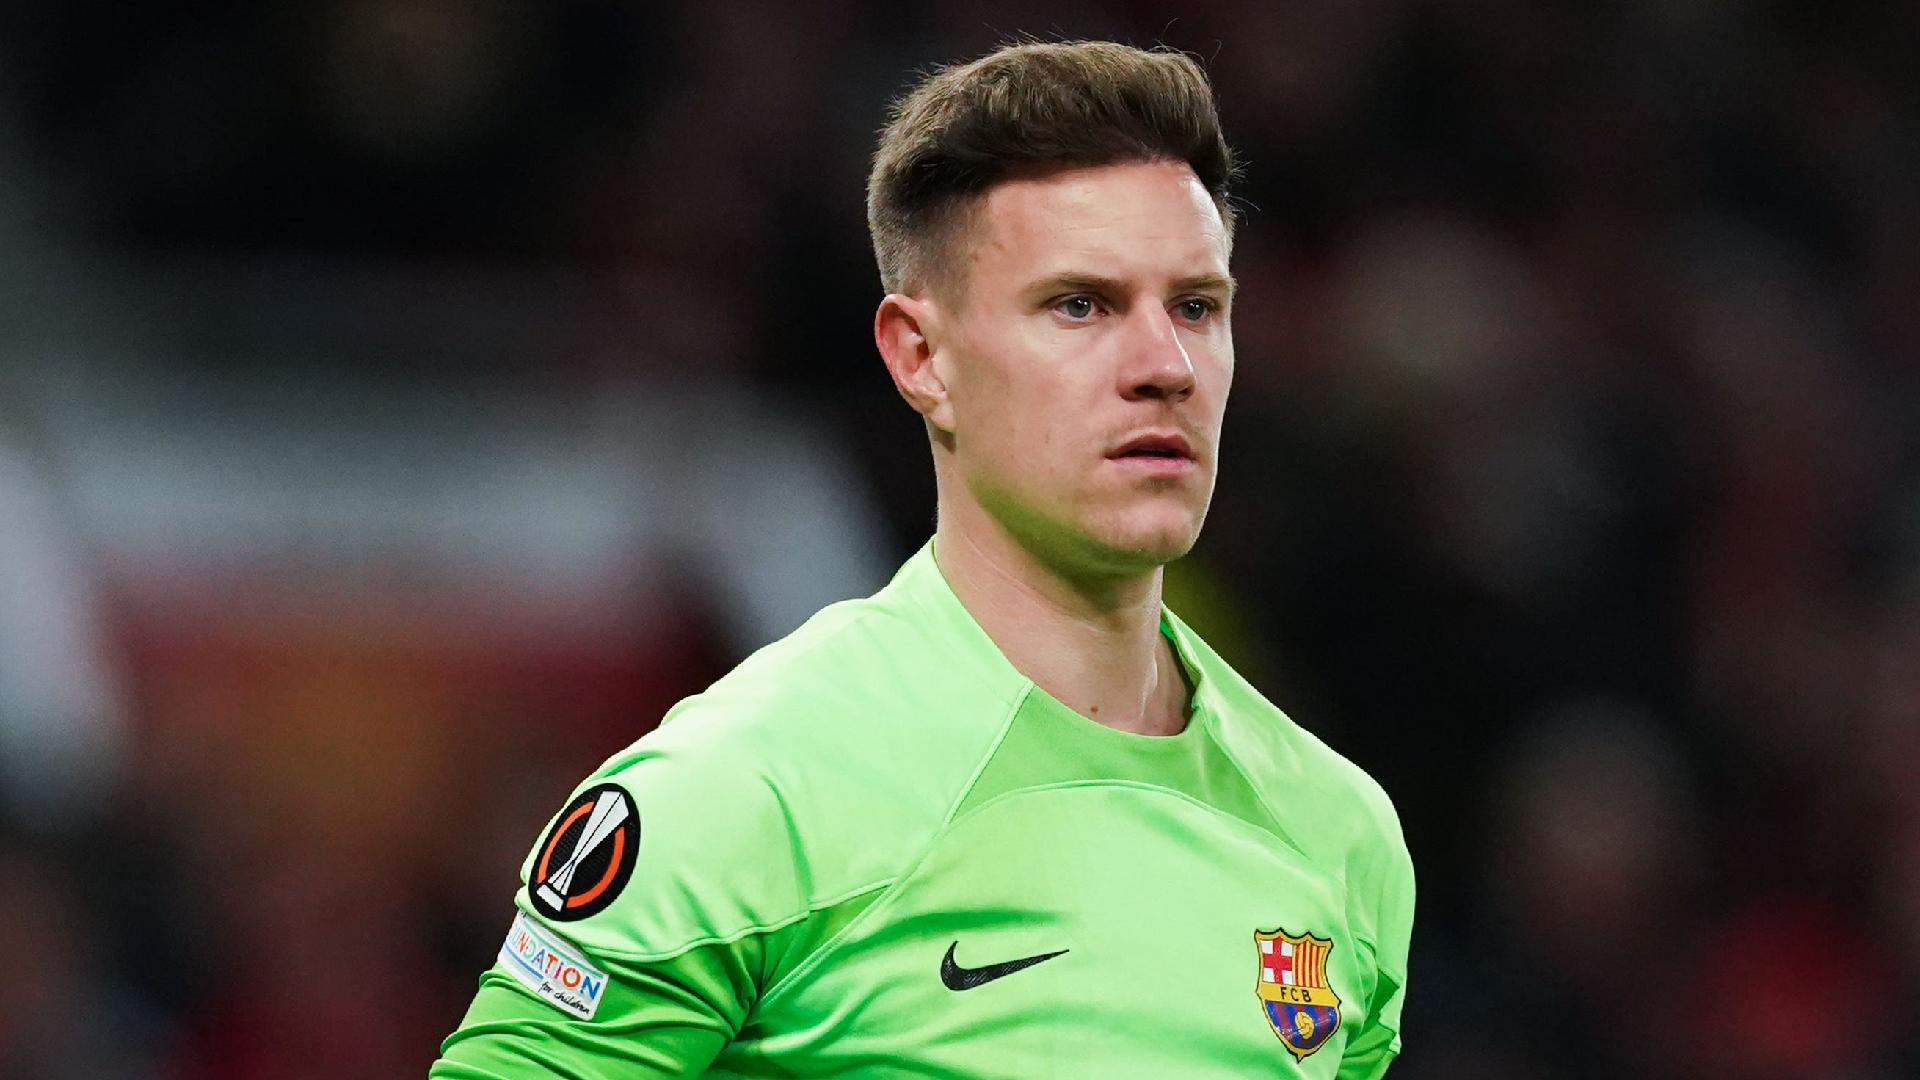 Ter Stegen To Miss Up To Three Months After Back Surgery